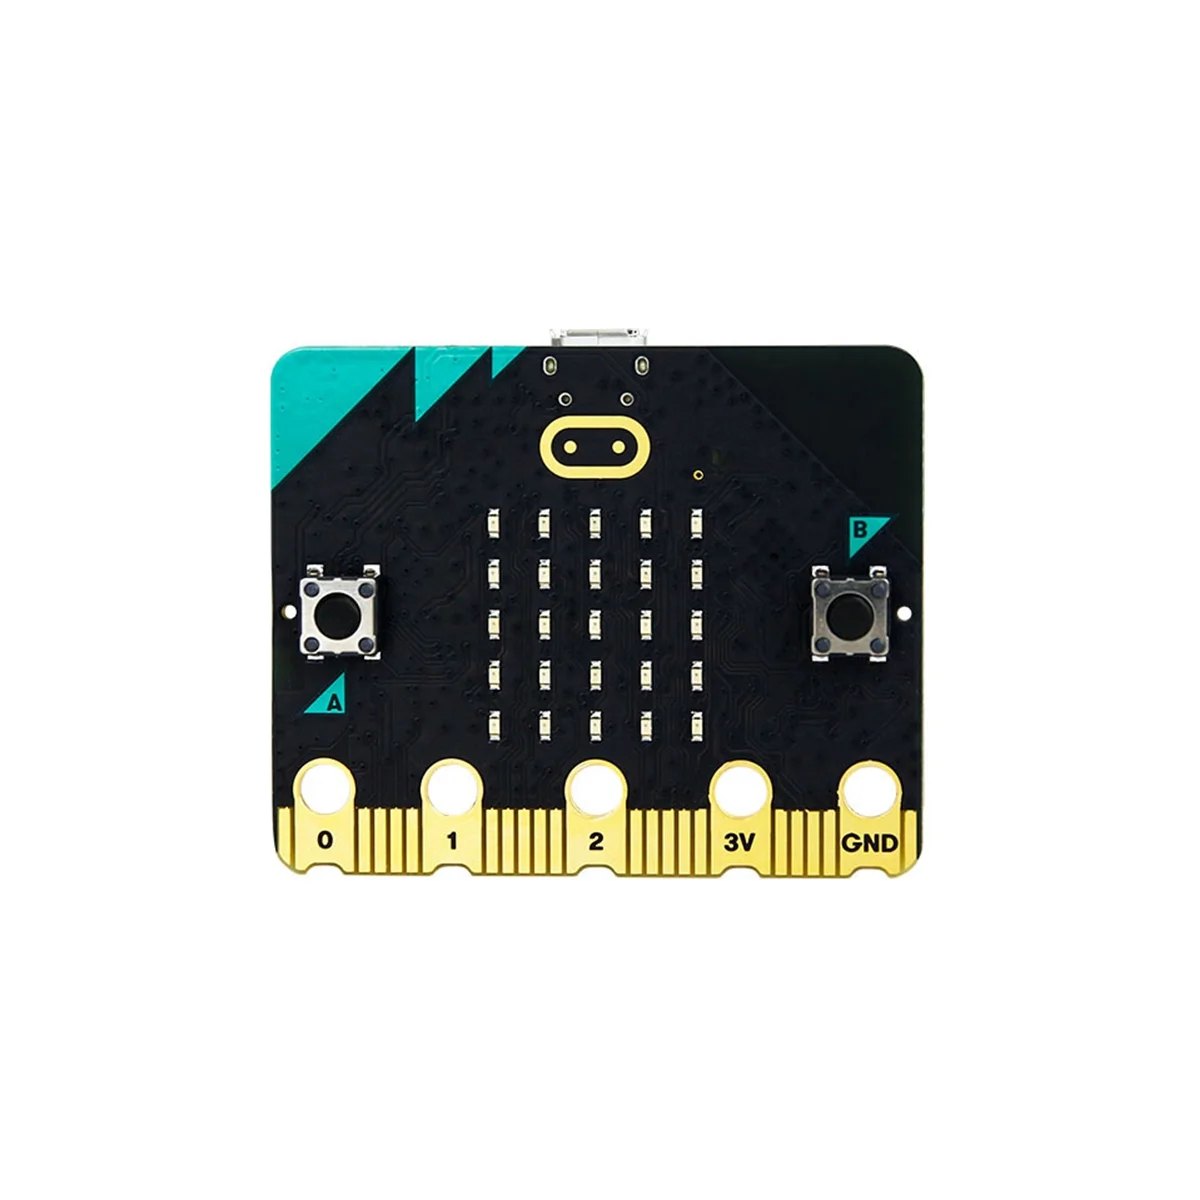 

Bbc Microbit V2.0 Motherboard an Introduction To Graphical Programming in Python for Primary and Secondary Schools